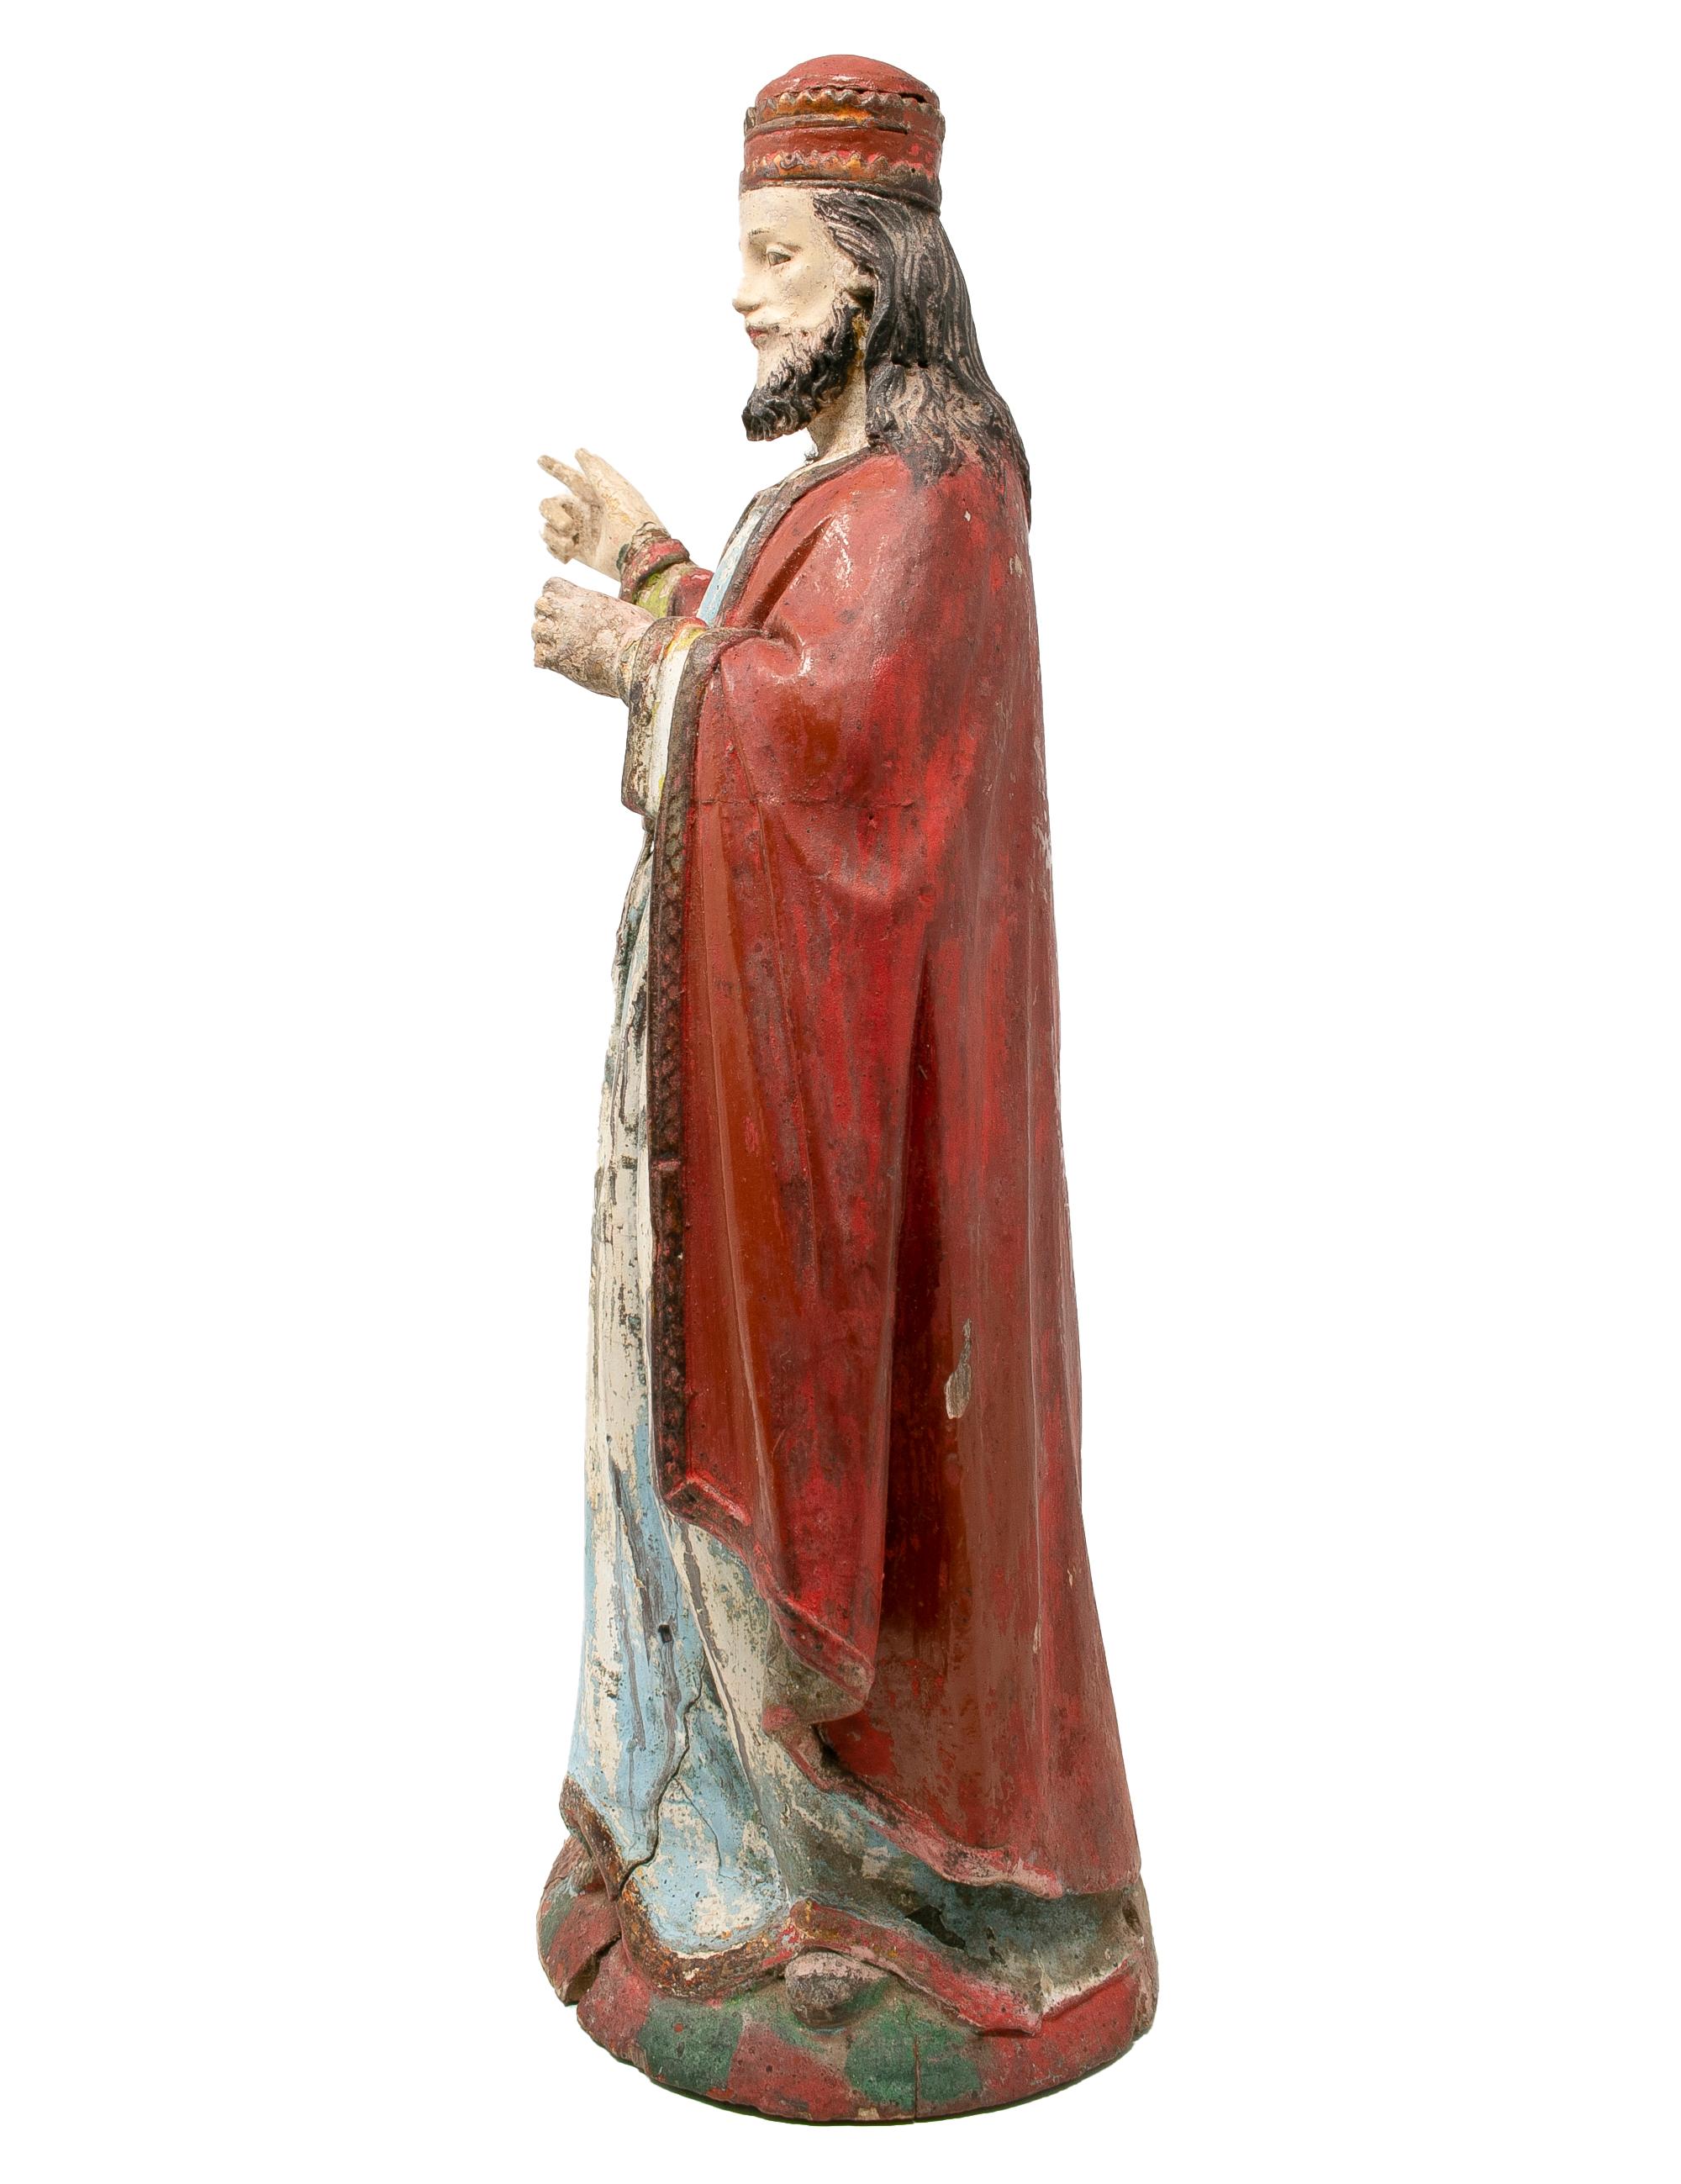 Polychromed Mid-19th Century Spanish Saint Painted Wooden Figurative Sculpture For Sale